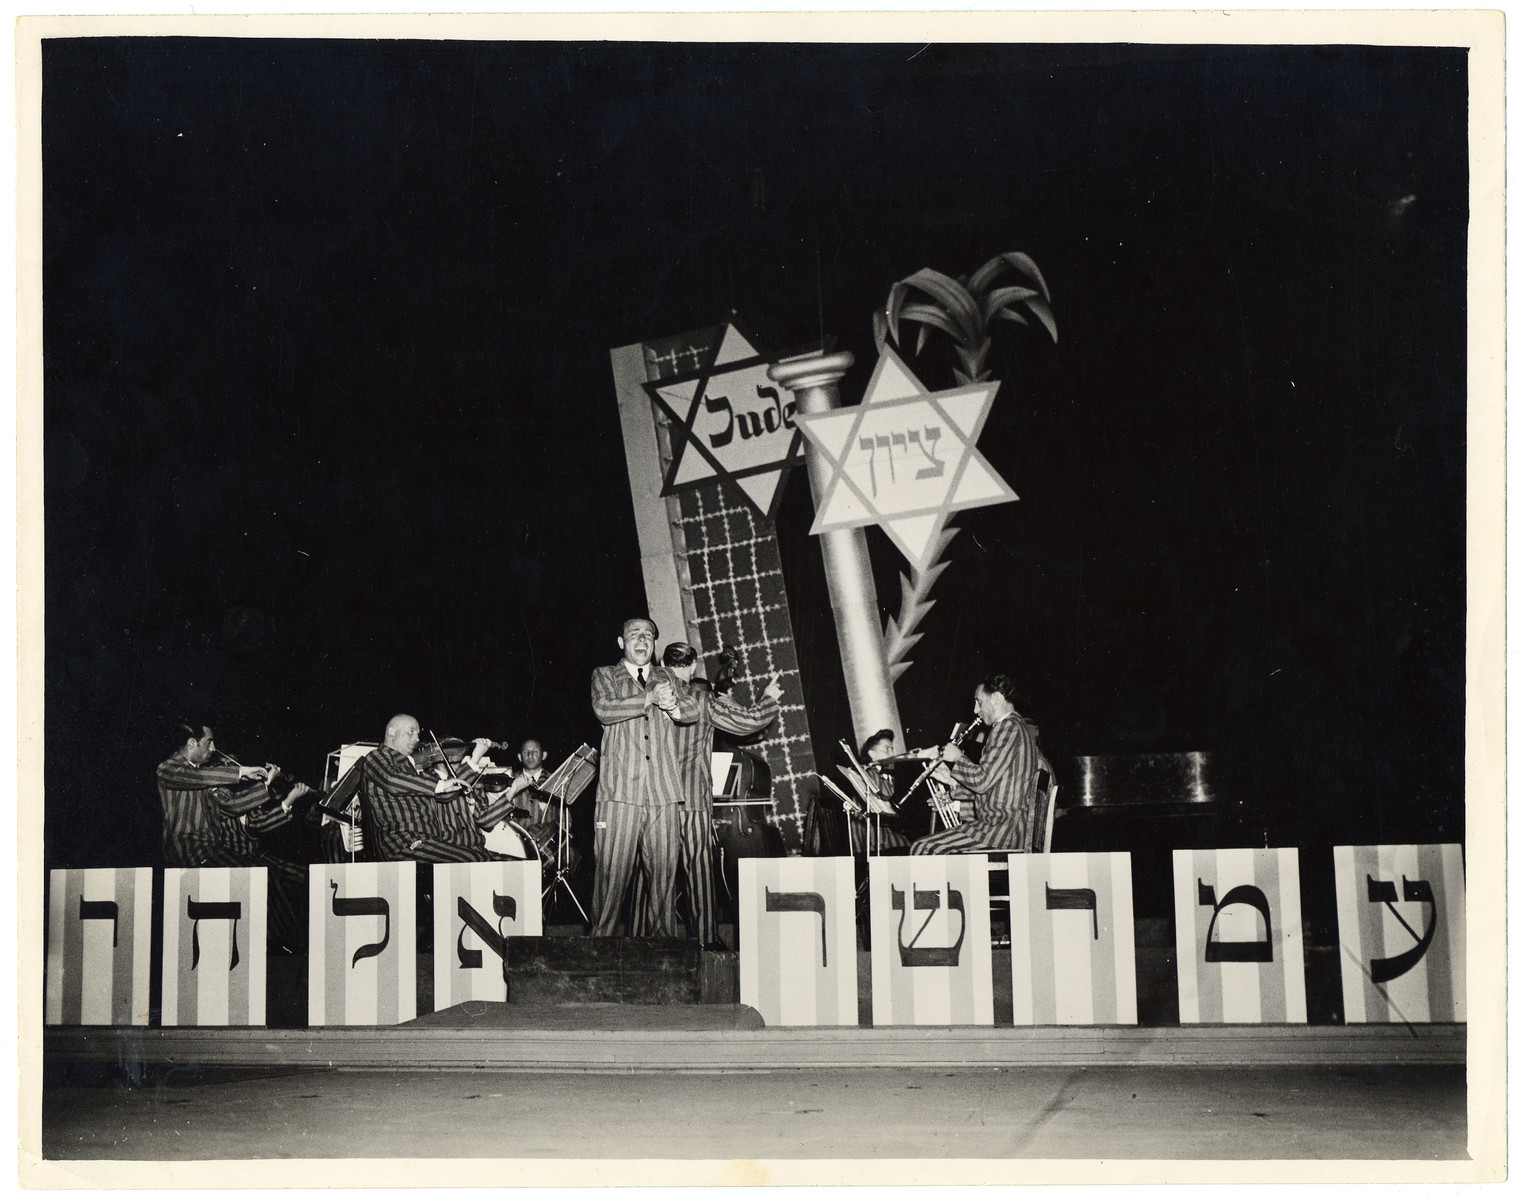 The Saint Ottilien Ex-Concentration Camp Orchestra performs a concert in Munich for American soldiers and UJA staff.

The sign in front reads "Am Yisrael Chai" (the nation of Israel lives).  

Pictured from left to right are Max Beker (violin), Max Borstein (violin), Melech Granat (drums), Jerzy Richter (voice), Fania Beker (piano) and Rala Wolfberg (clarinet).

See photograph 29734  for alternate caption.